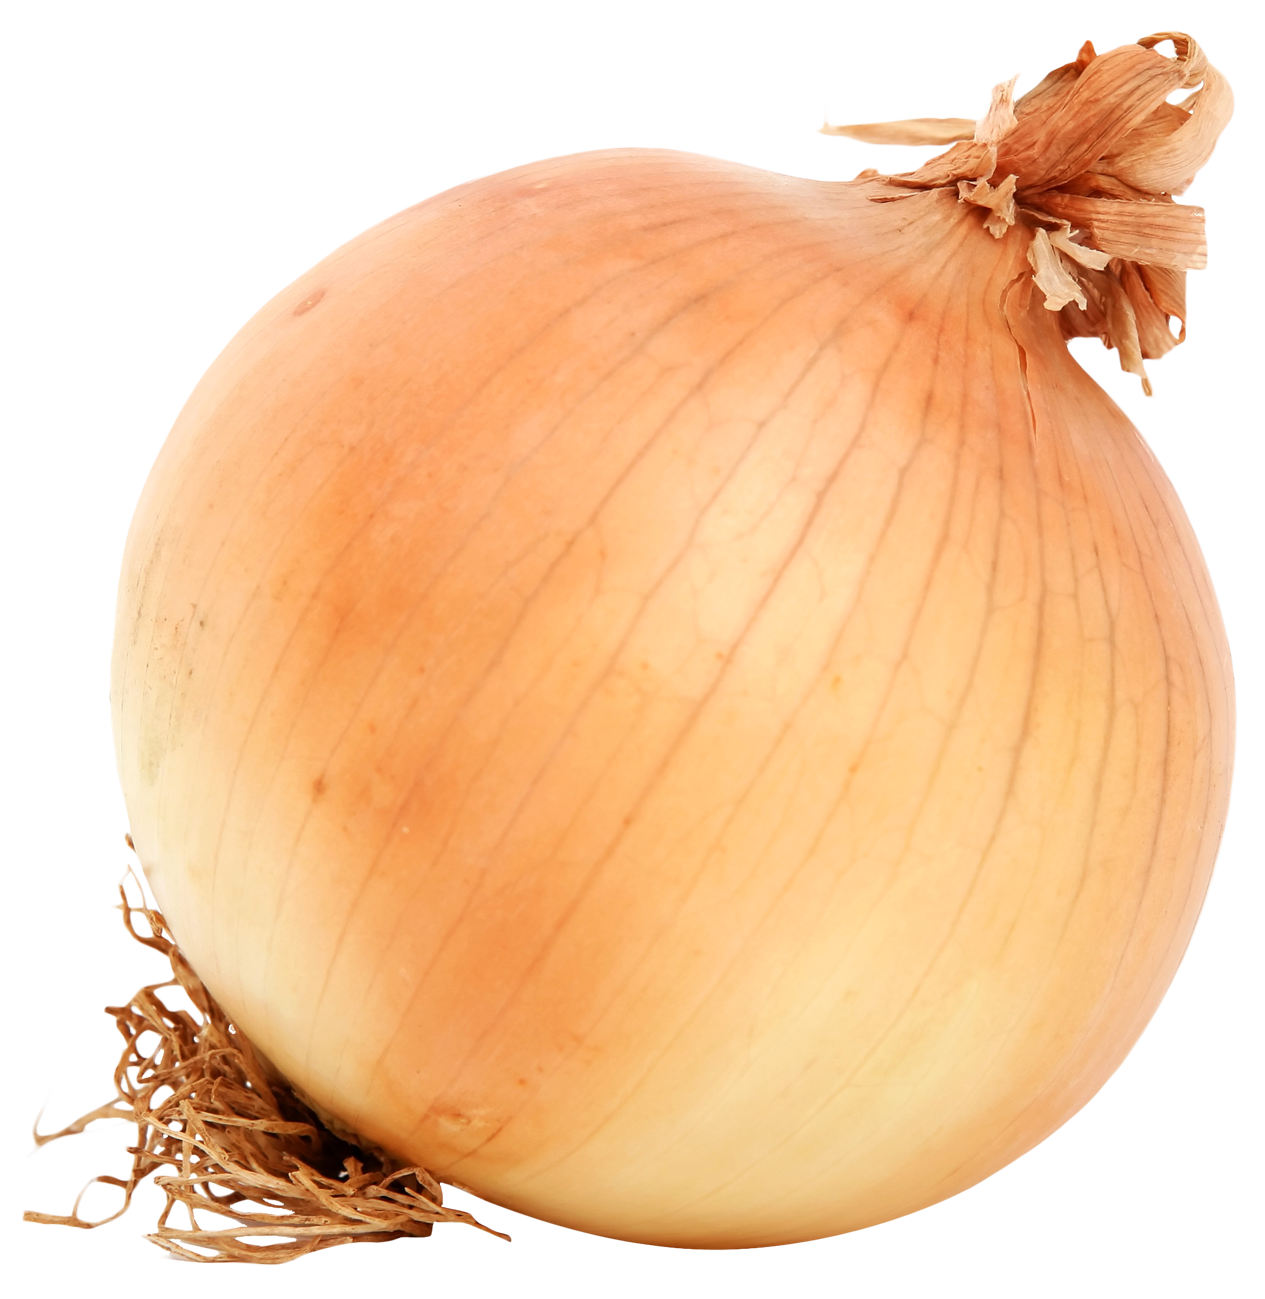 Brown Onion Png Image - Onion, Transparent background PNG HD thumbnail